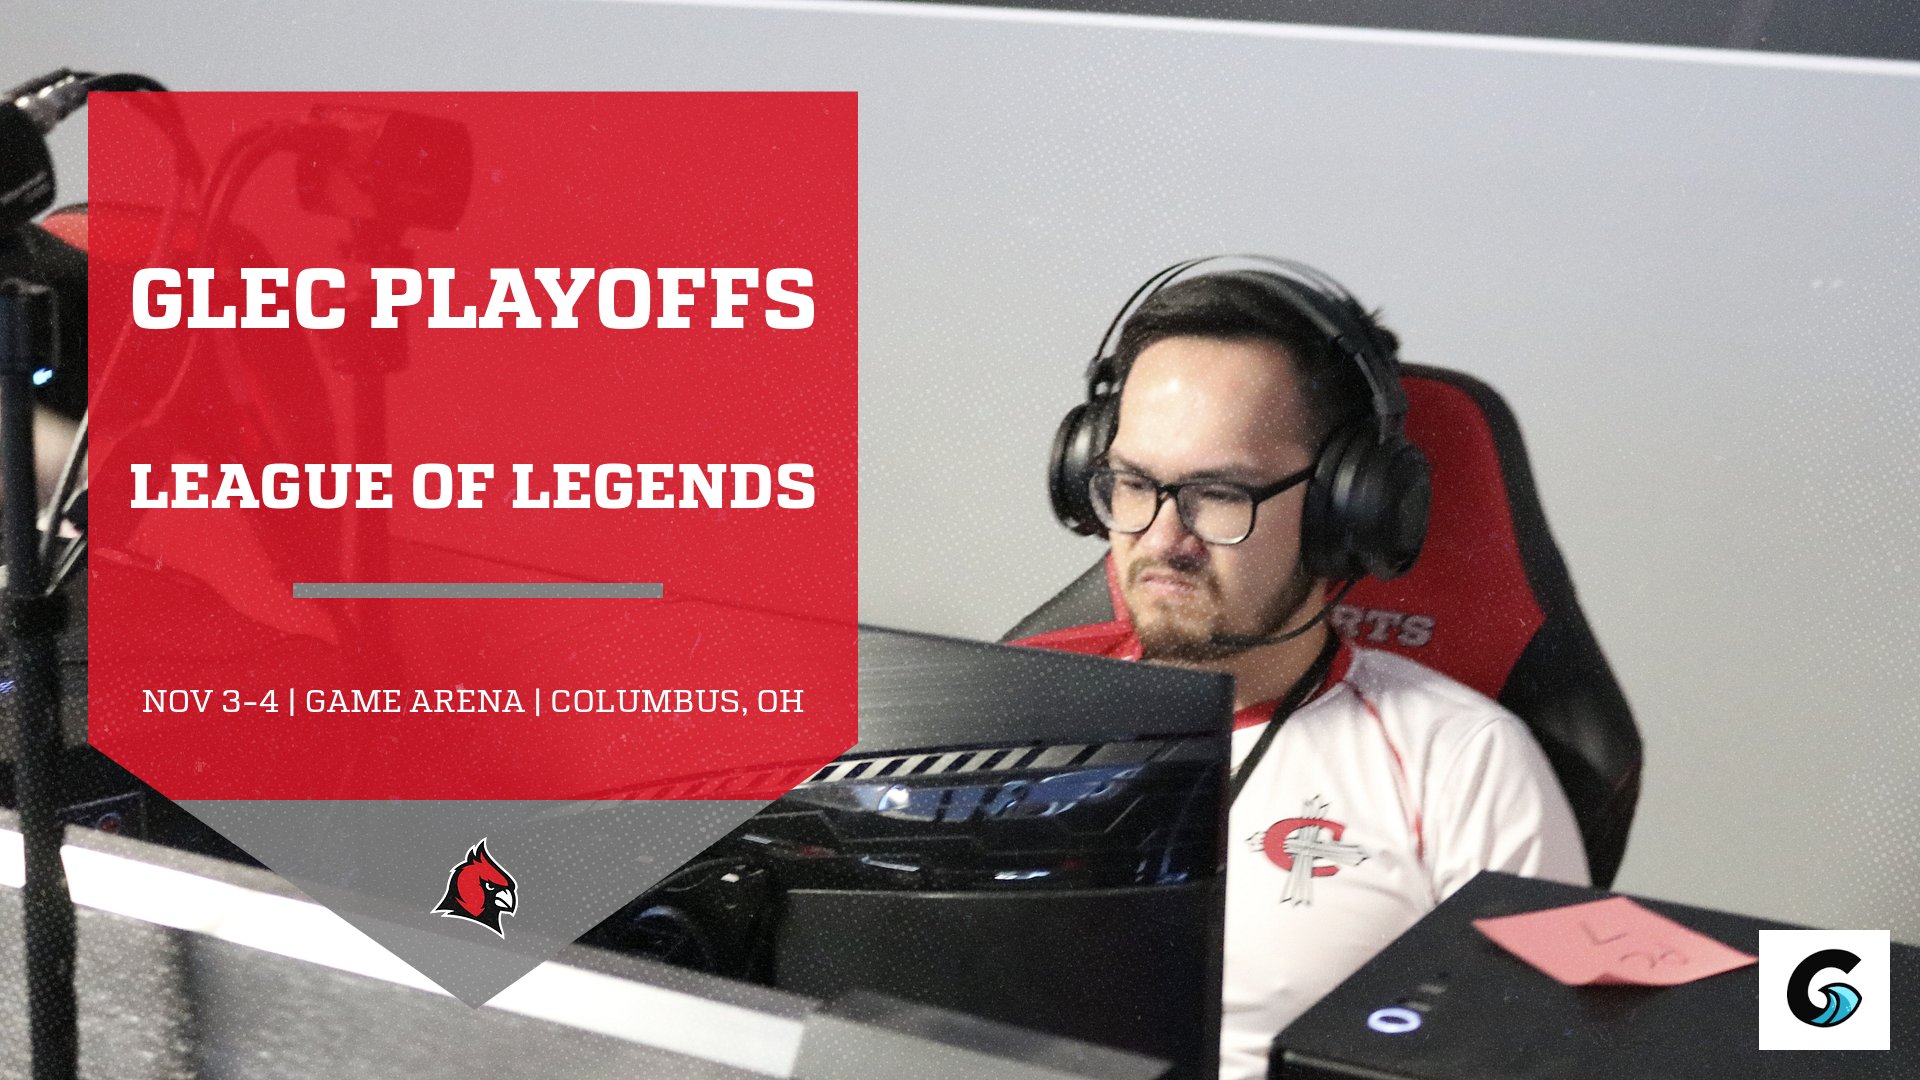 League of Legends Qualifies for GLEC Playoffs